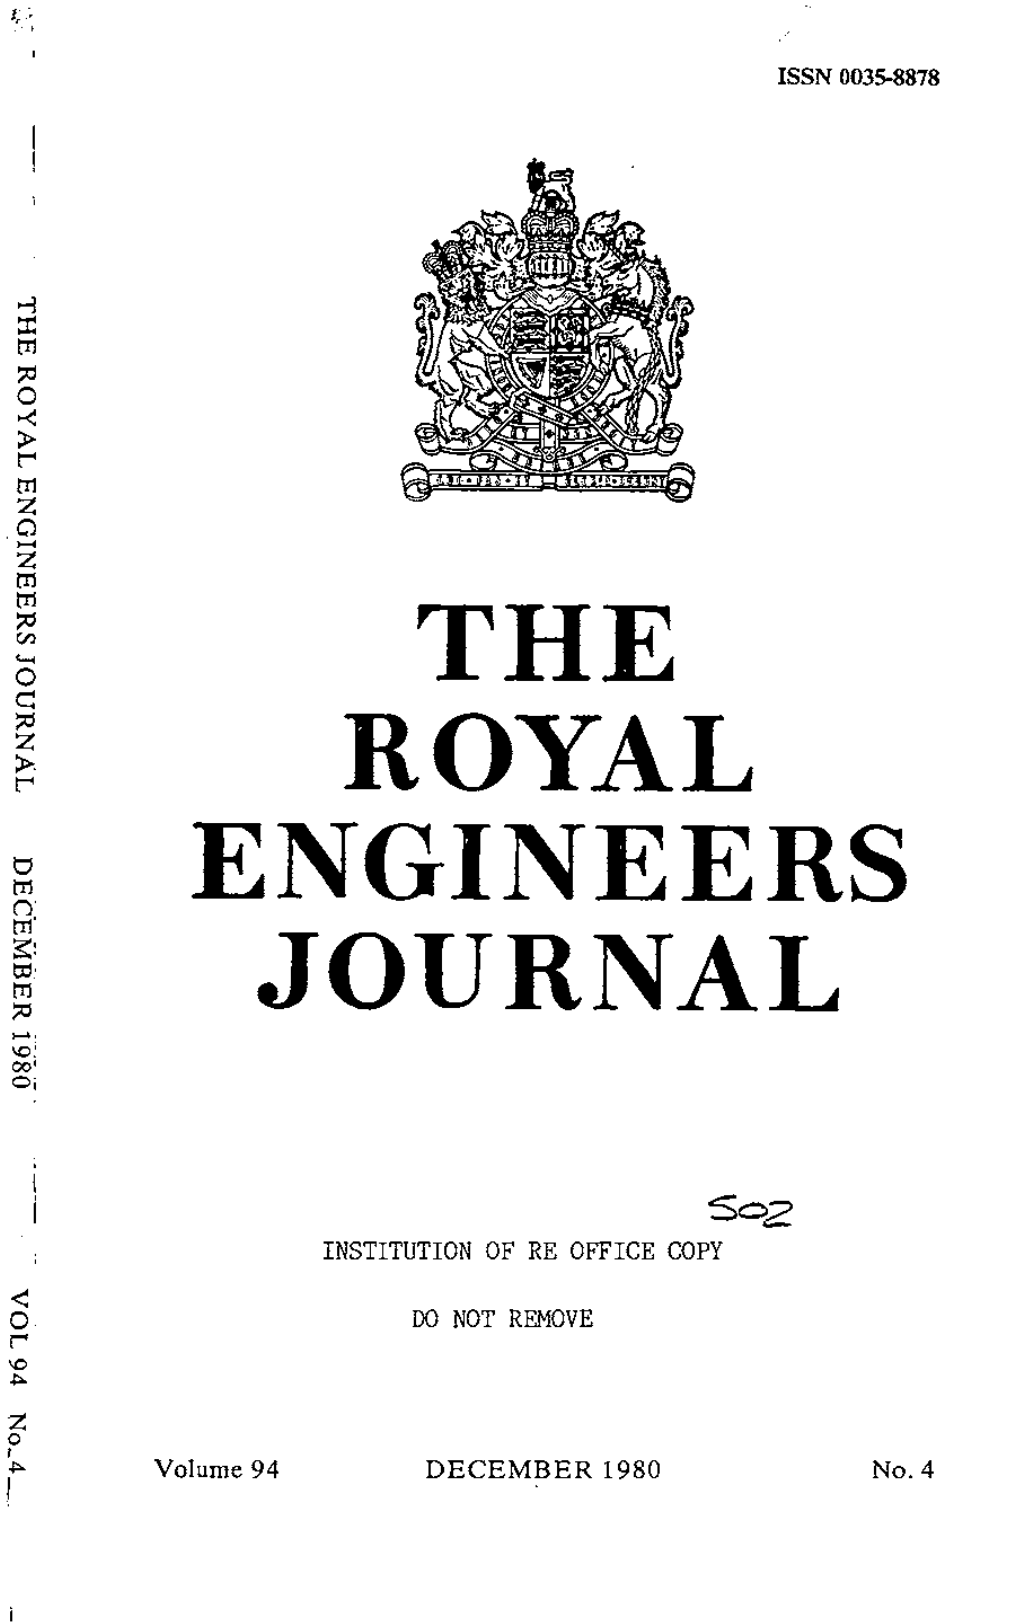 The Royal Journal